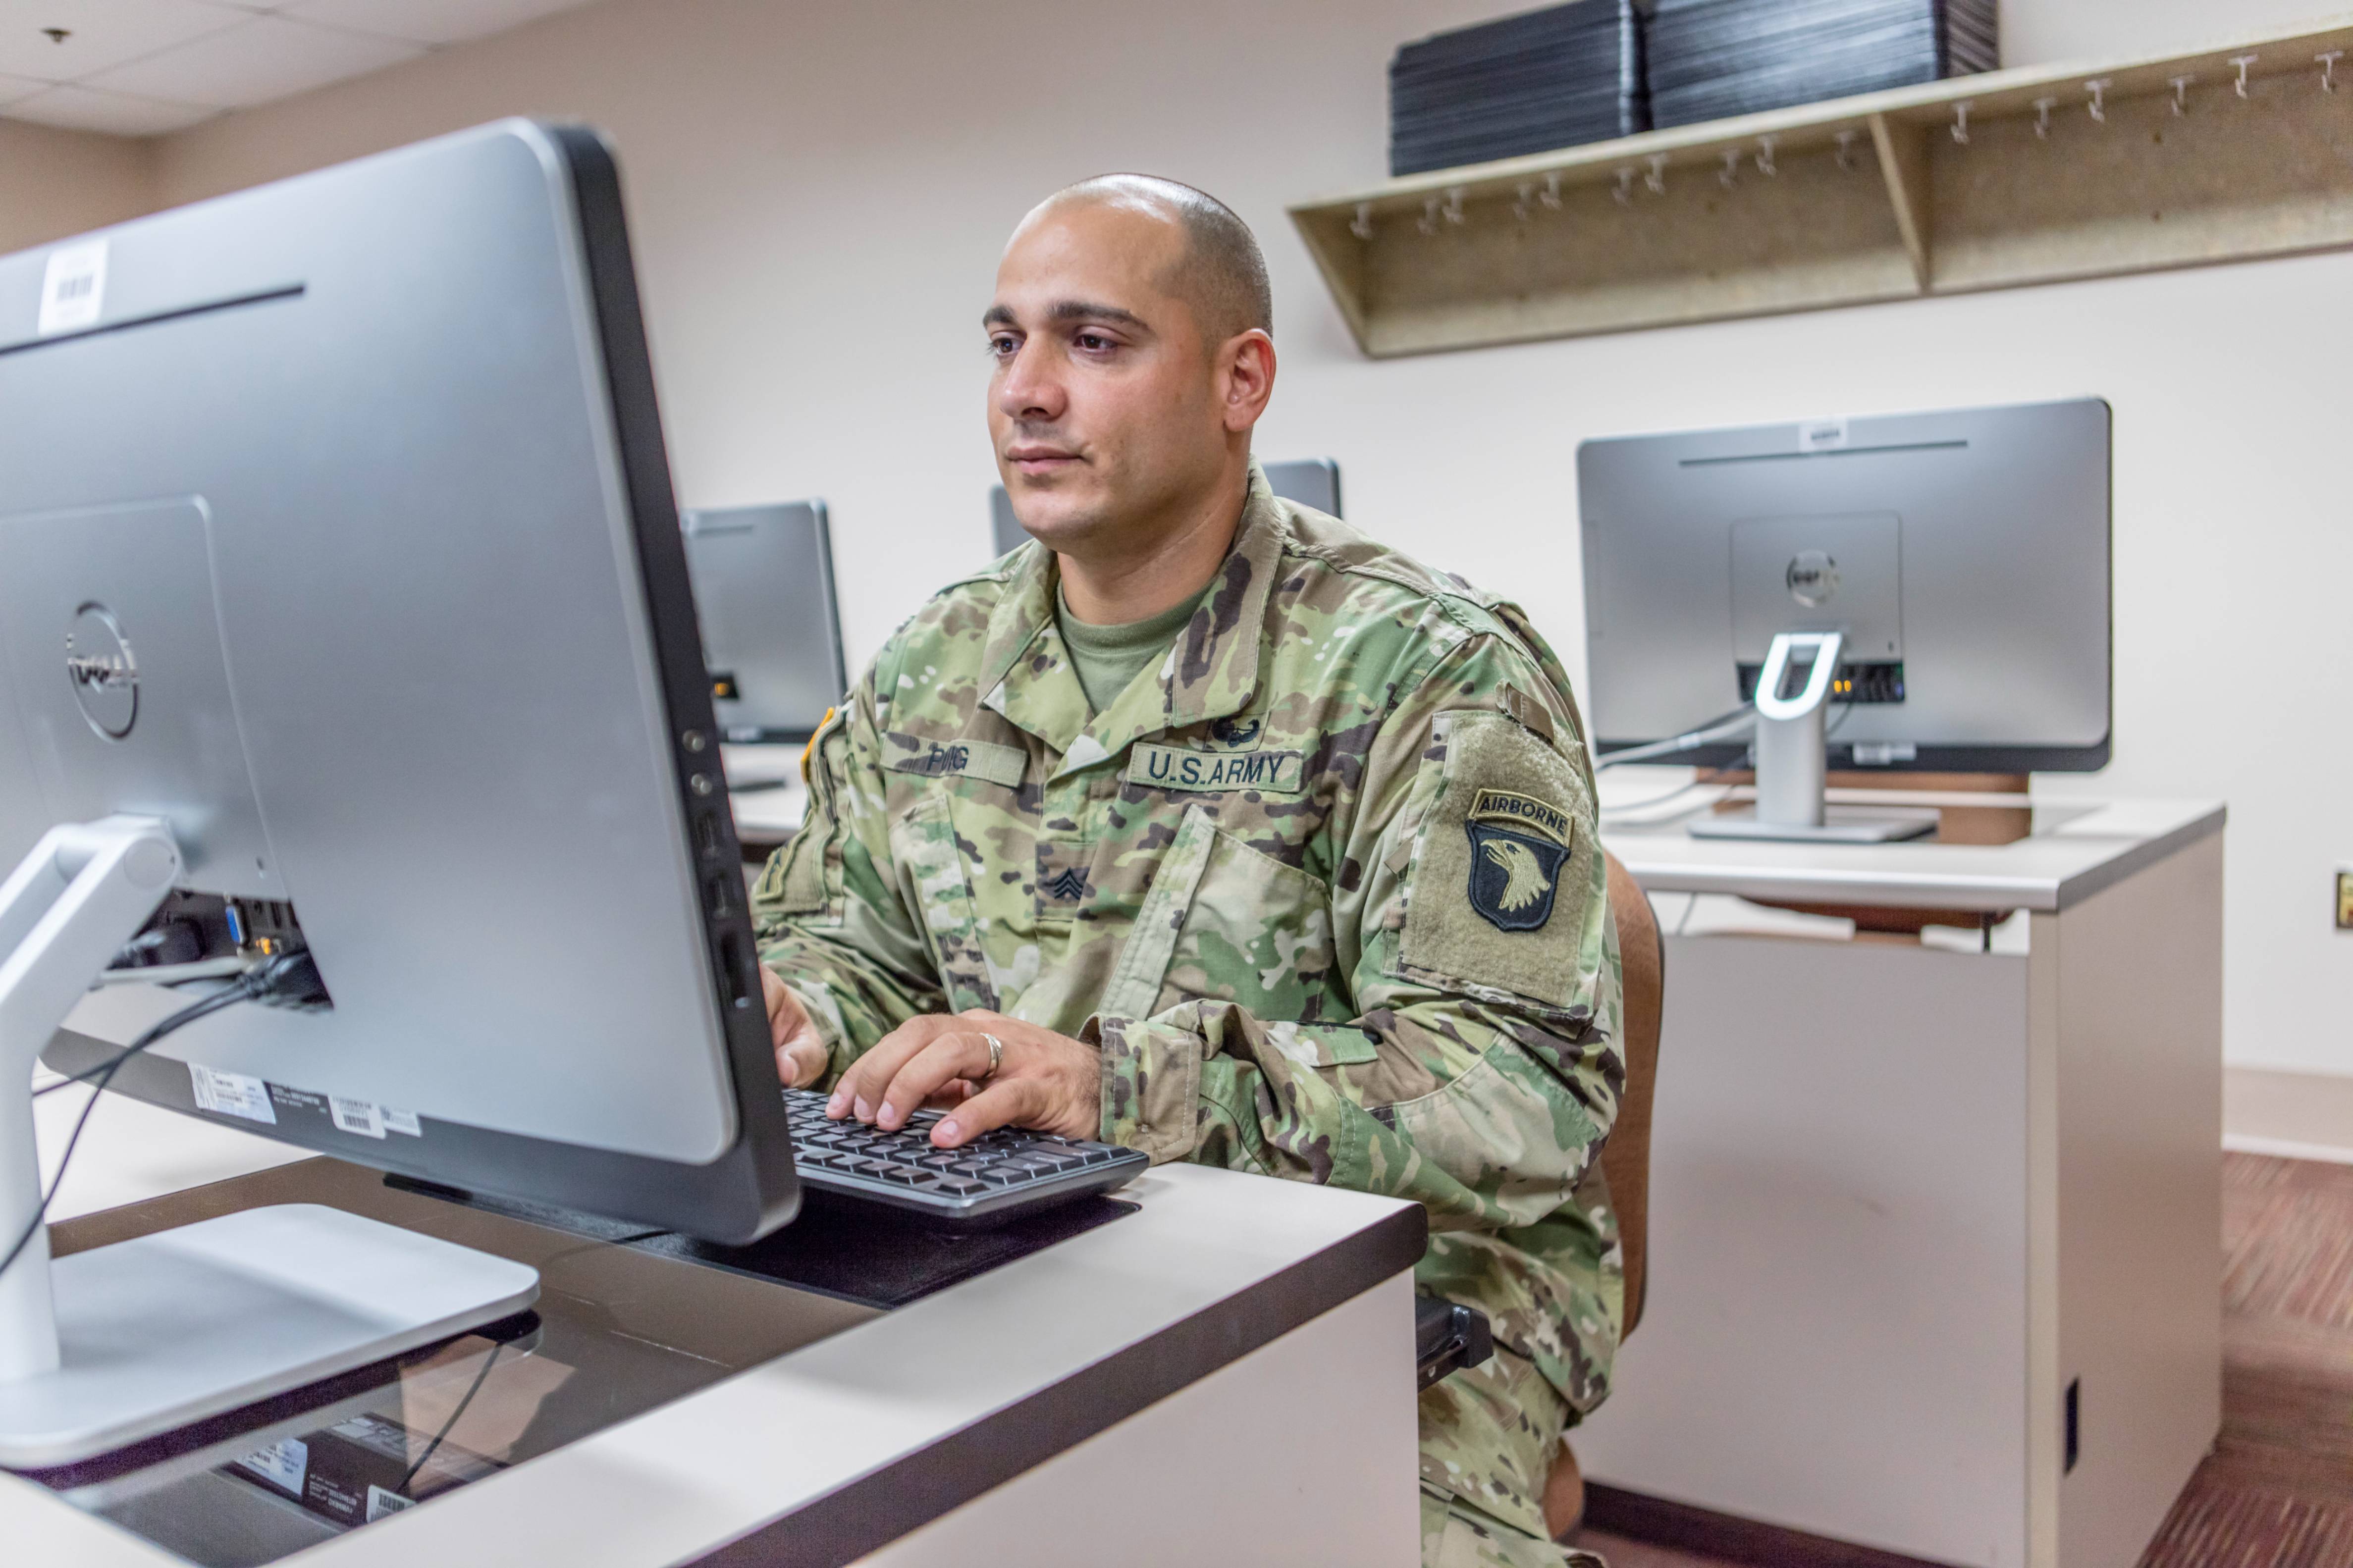 Man in army fatigues sitting at computer